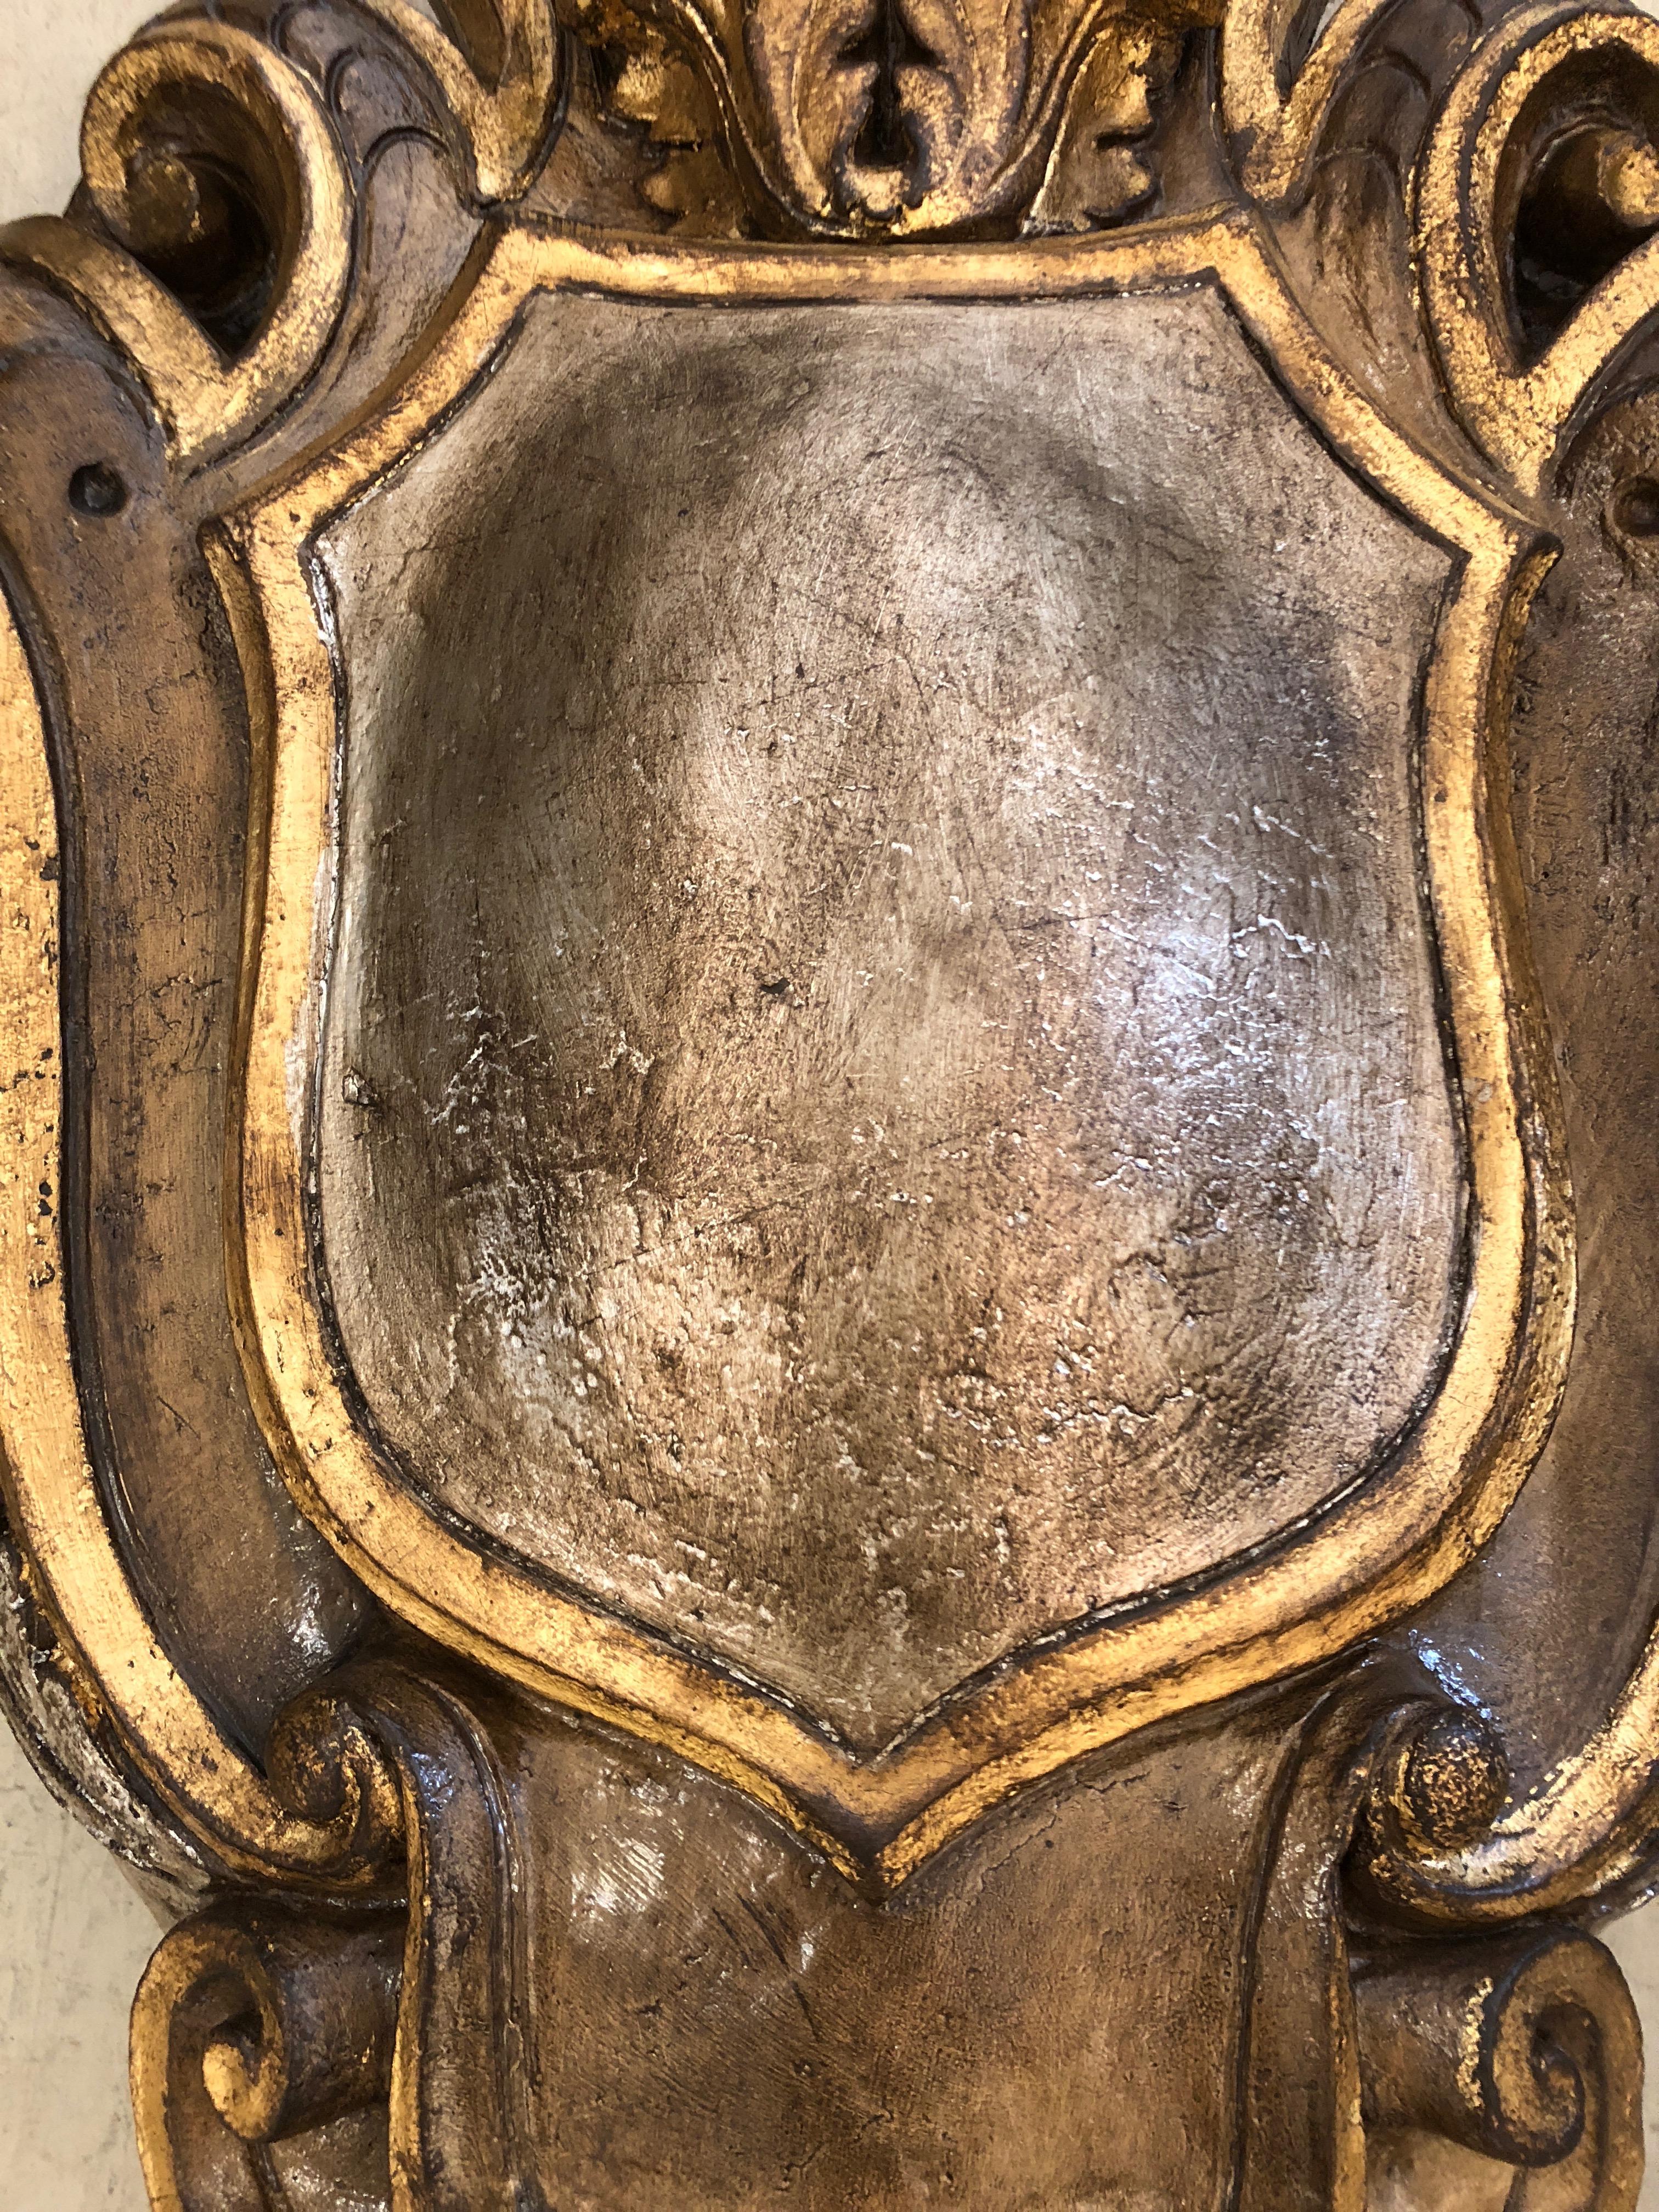 A superbly impressive large found object in the shape of a medieval shield, painted gold and silver. 
Would look amazing over a mantle. A true focal point.